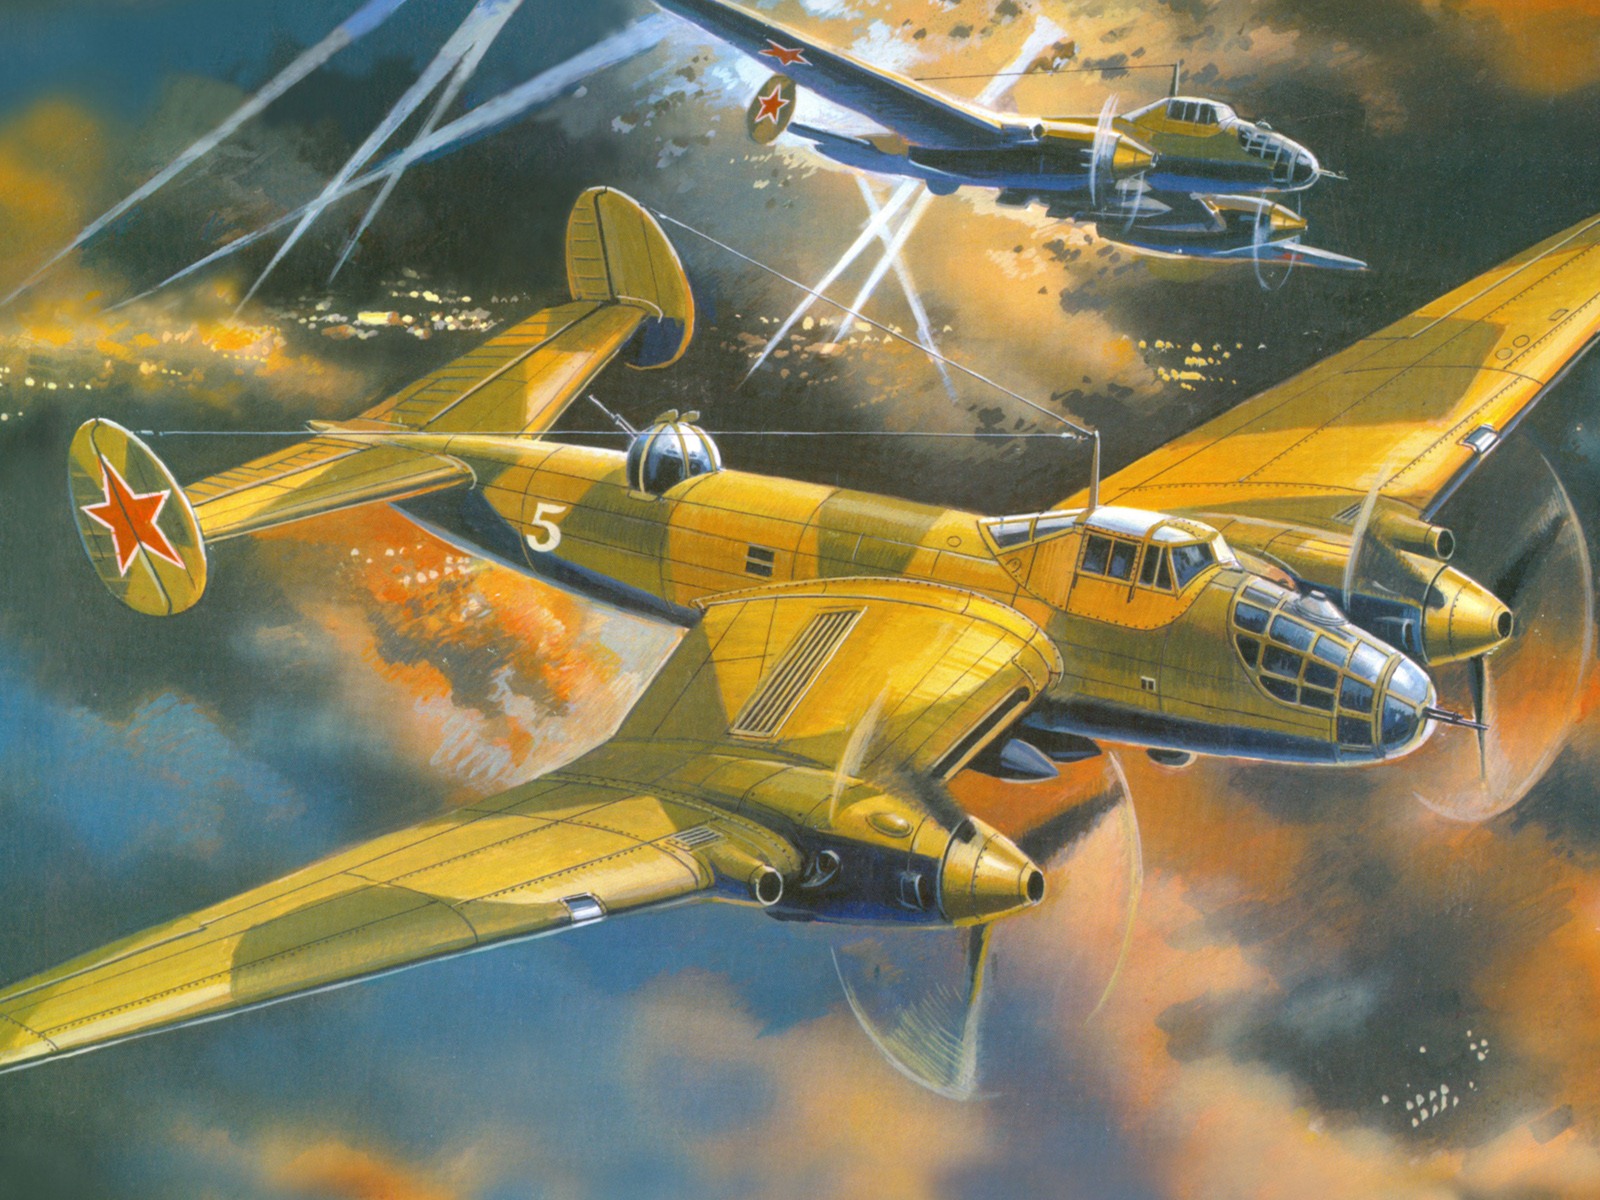 Military aircraft flight exquisite painting wallpapers #18 - 1600x1200